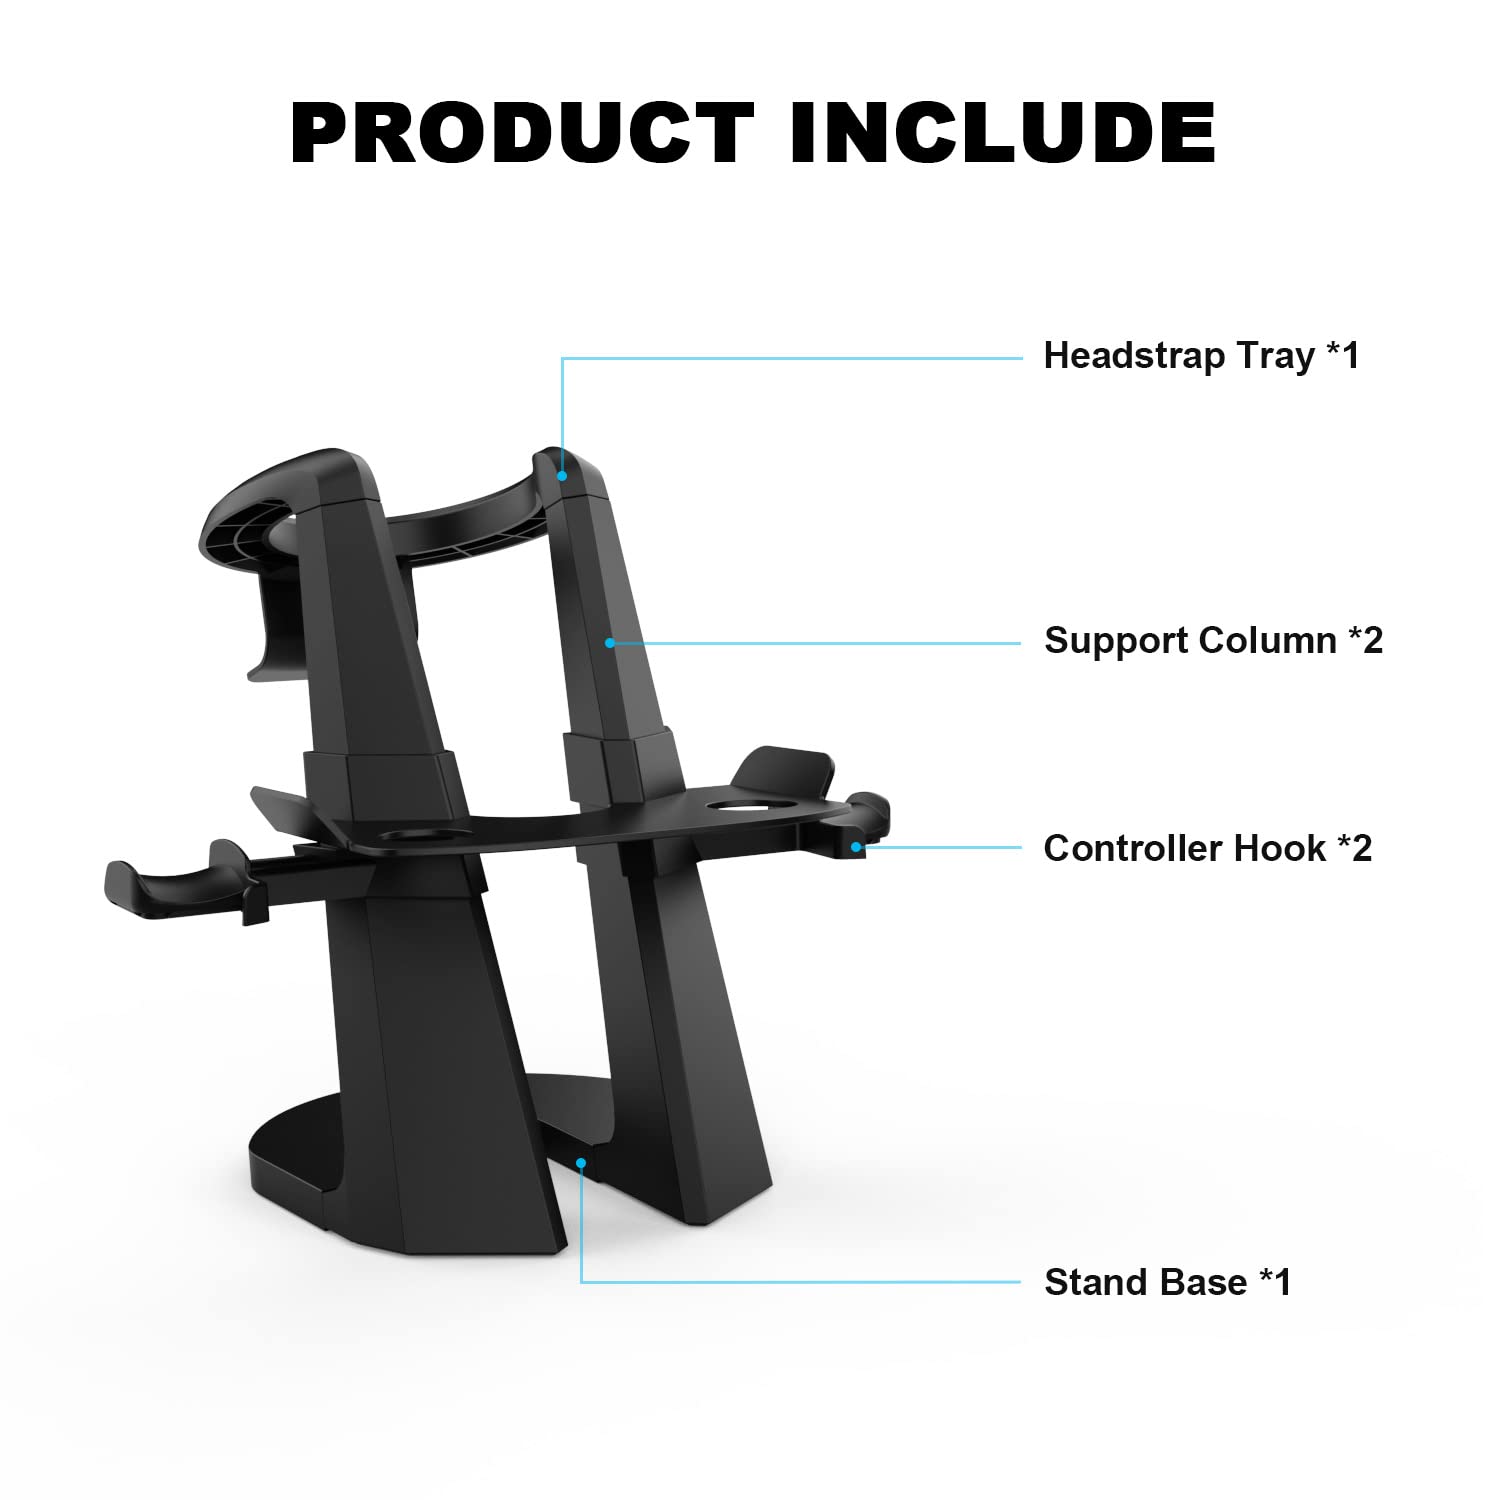 VR Stand Holder Storage Rack Set for Oculus quest, Quest 2, Rift, Rift S, Valve Index Headset and Touch Controllers